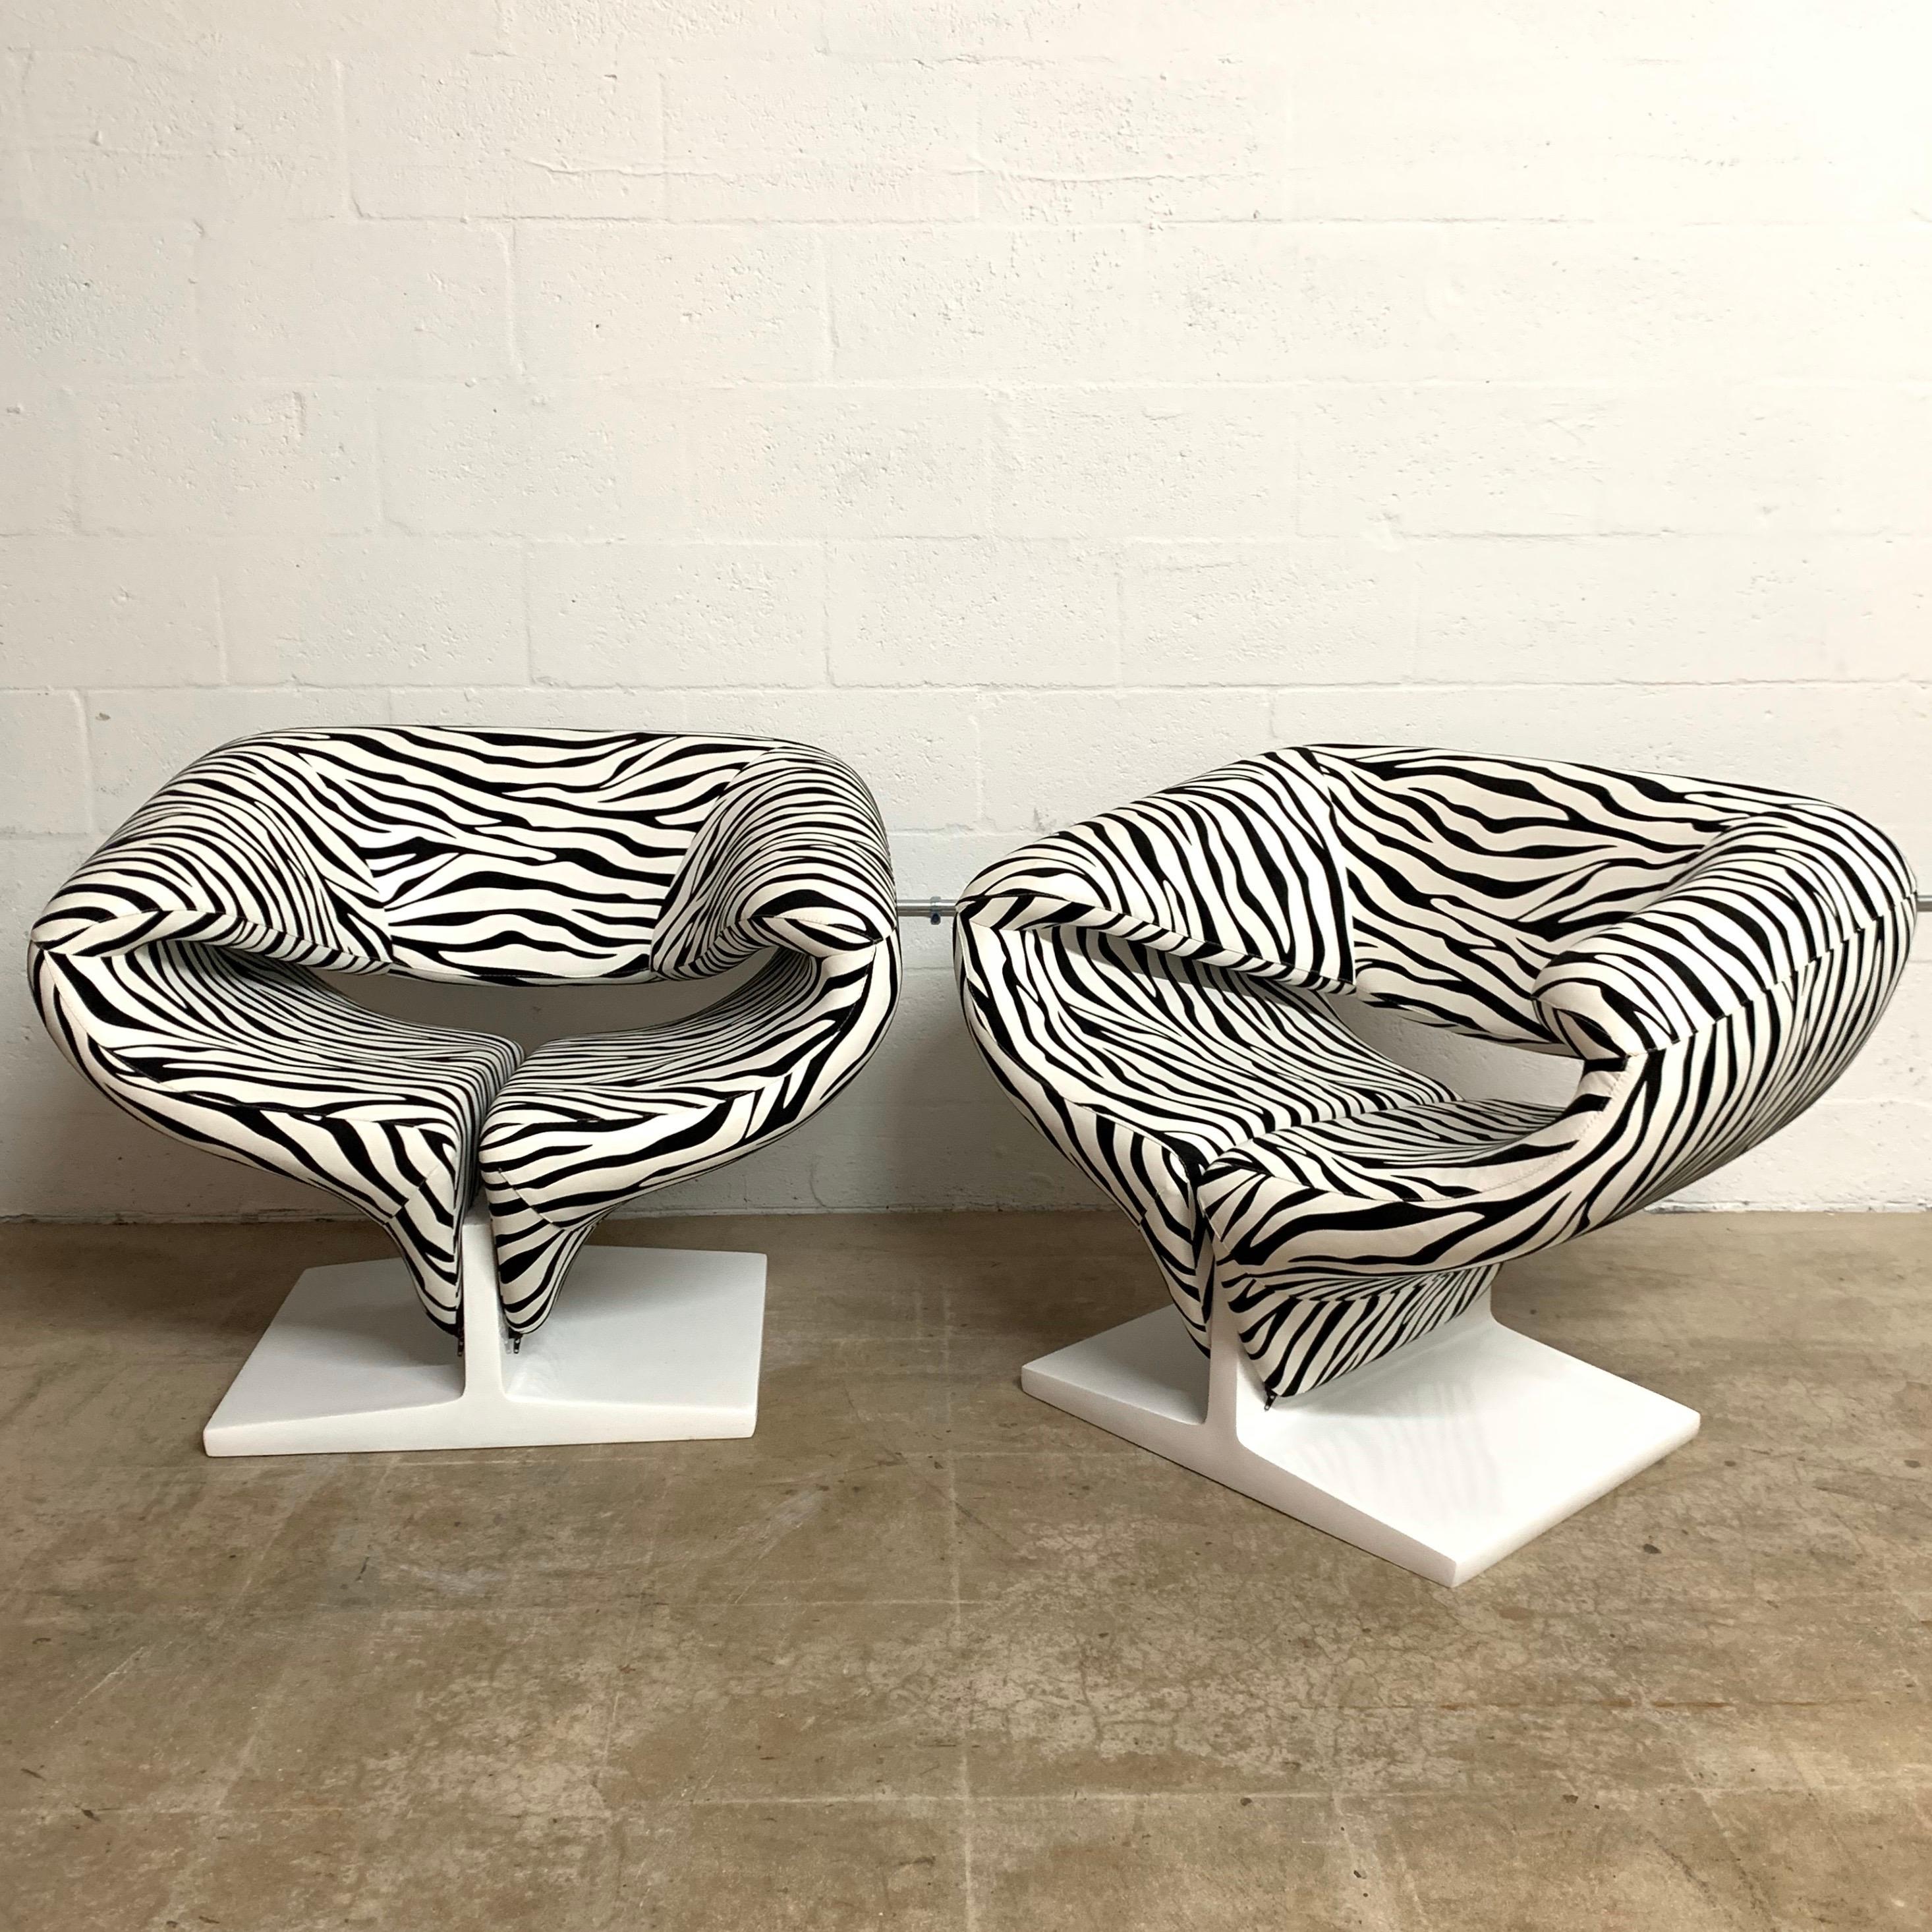 Set of two sculptural Ribbon chairs rendered in original Zebra stretch fabric with a white lacquered pressed wood base, designed by Pierre Paulin for Artifort, Netherlands, 1966